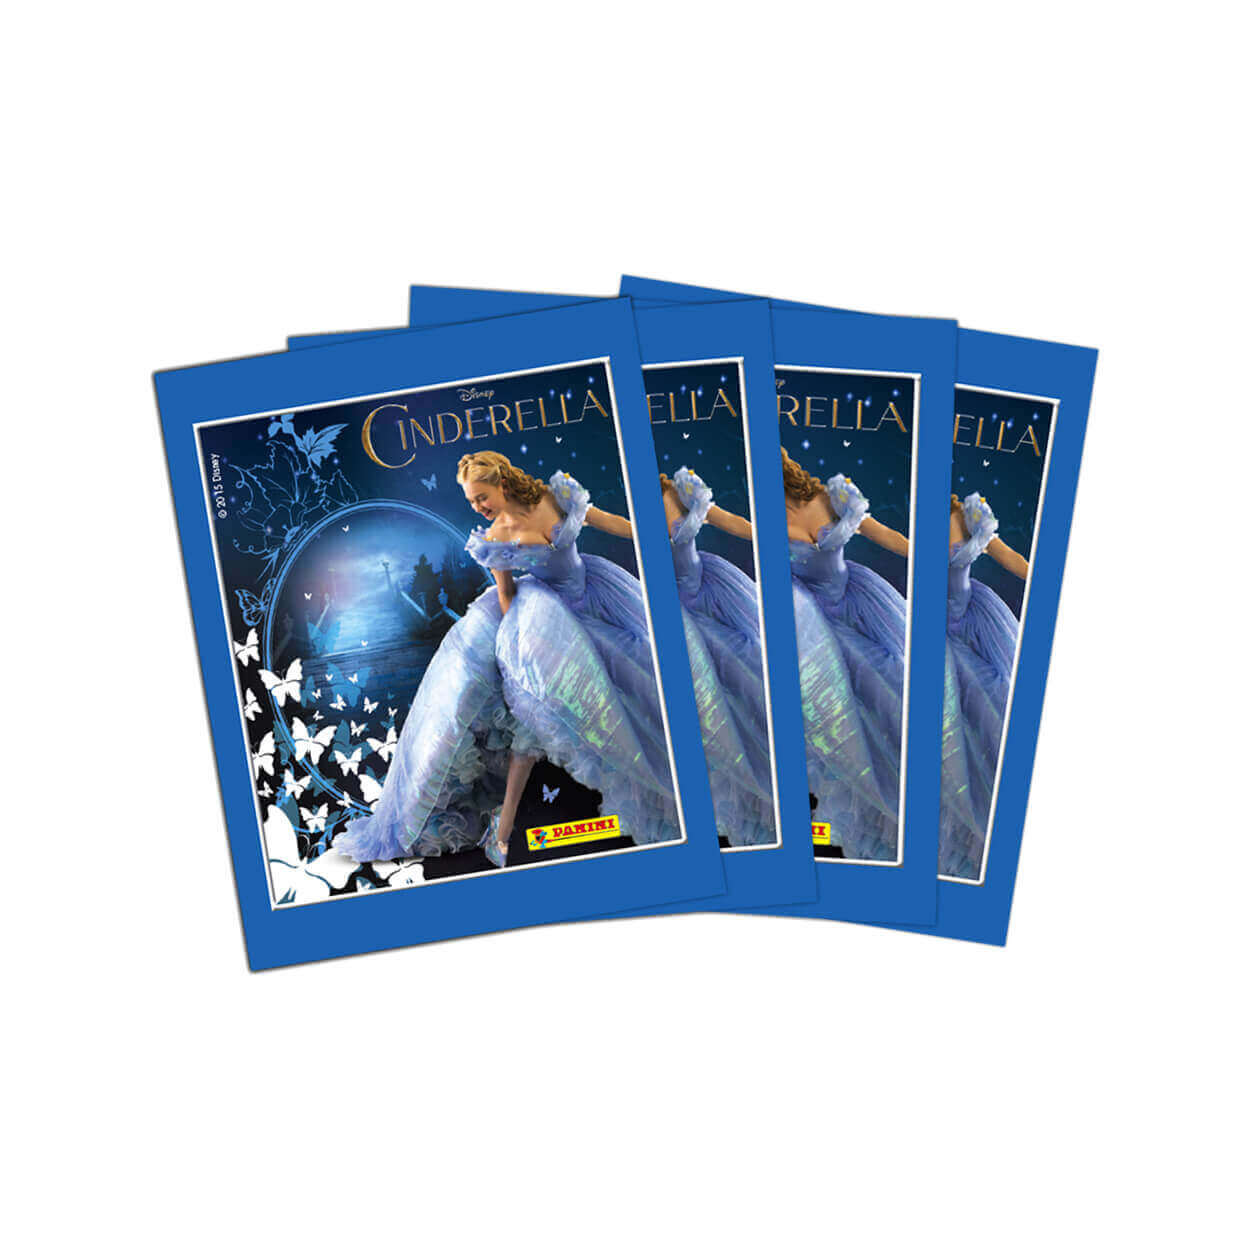 Panini Cinderella Sticker Collection Product: 50 Packs Sticker Collection Earthlets